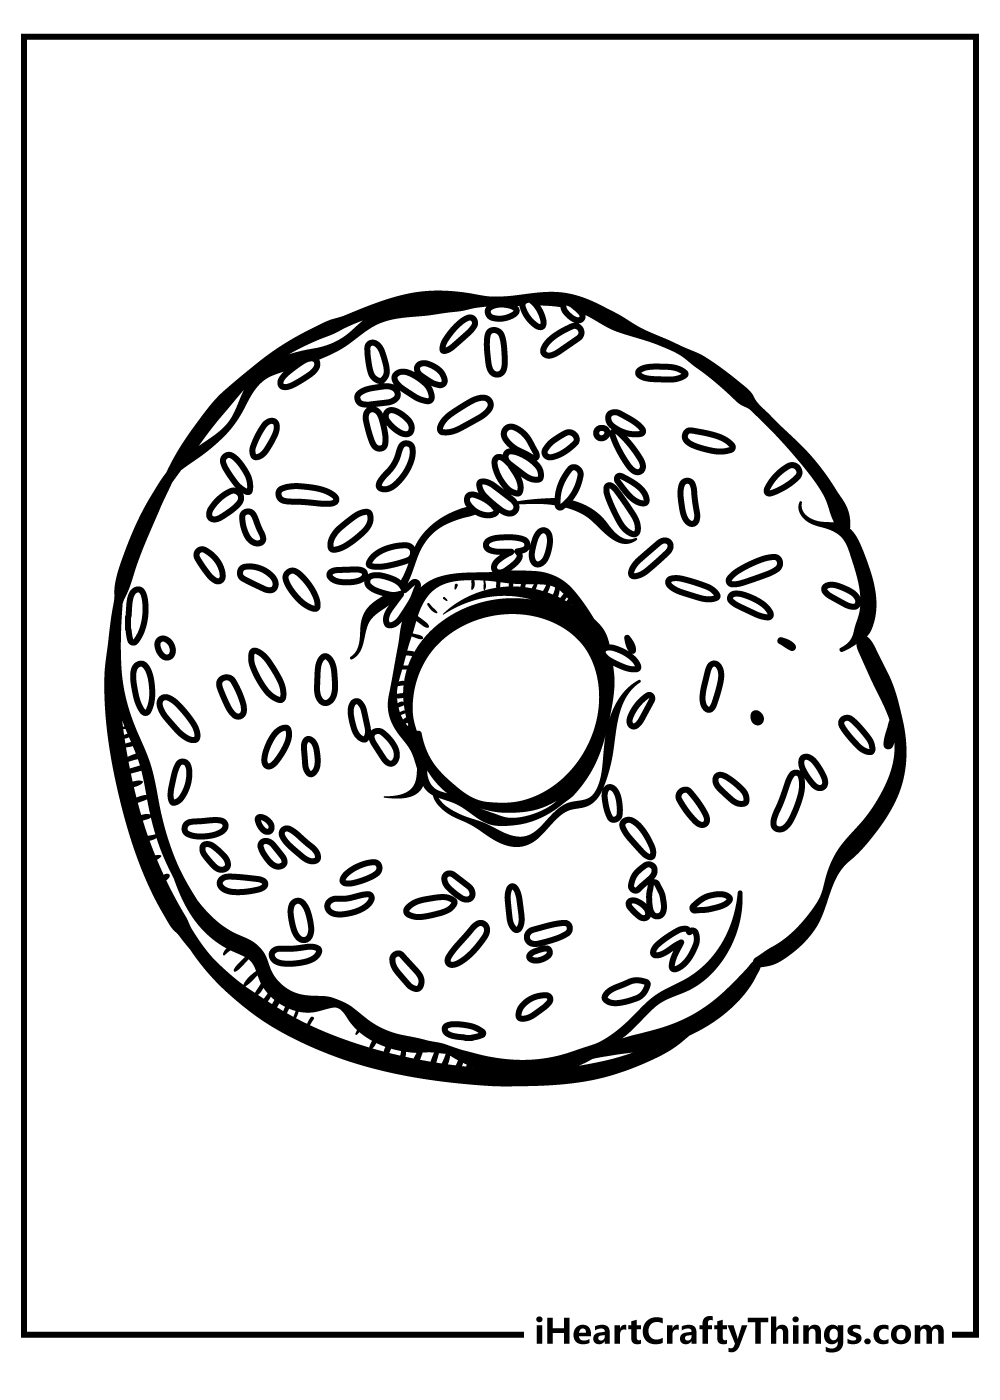 Dessert Coloring Pages free pdf download